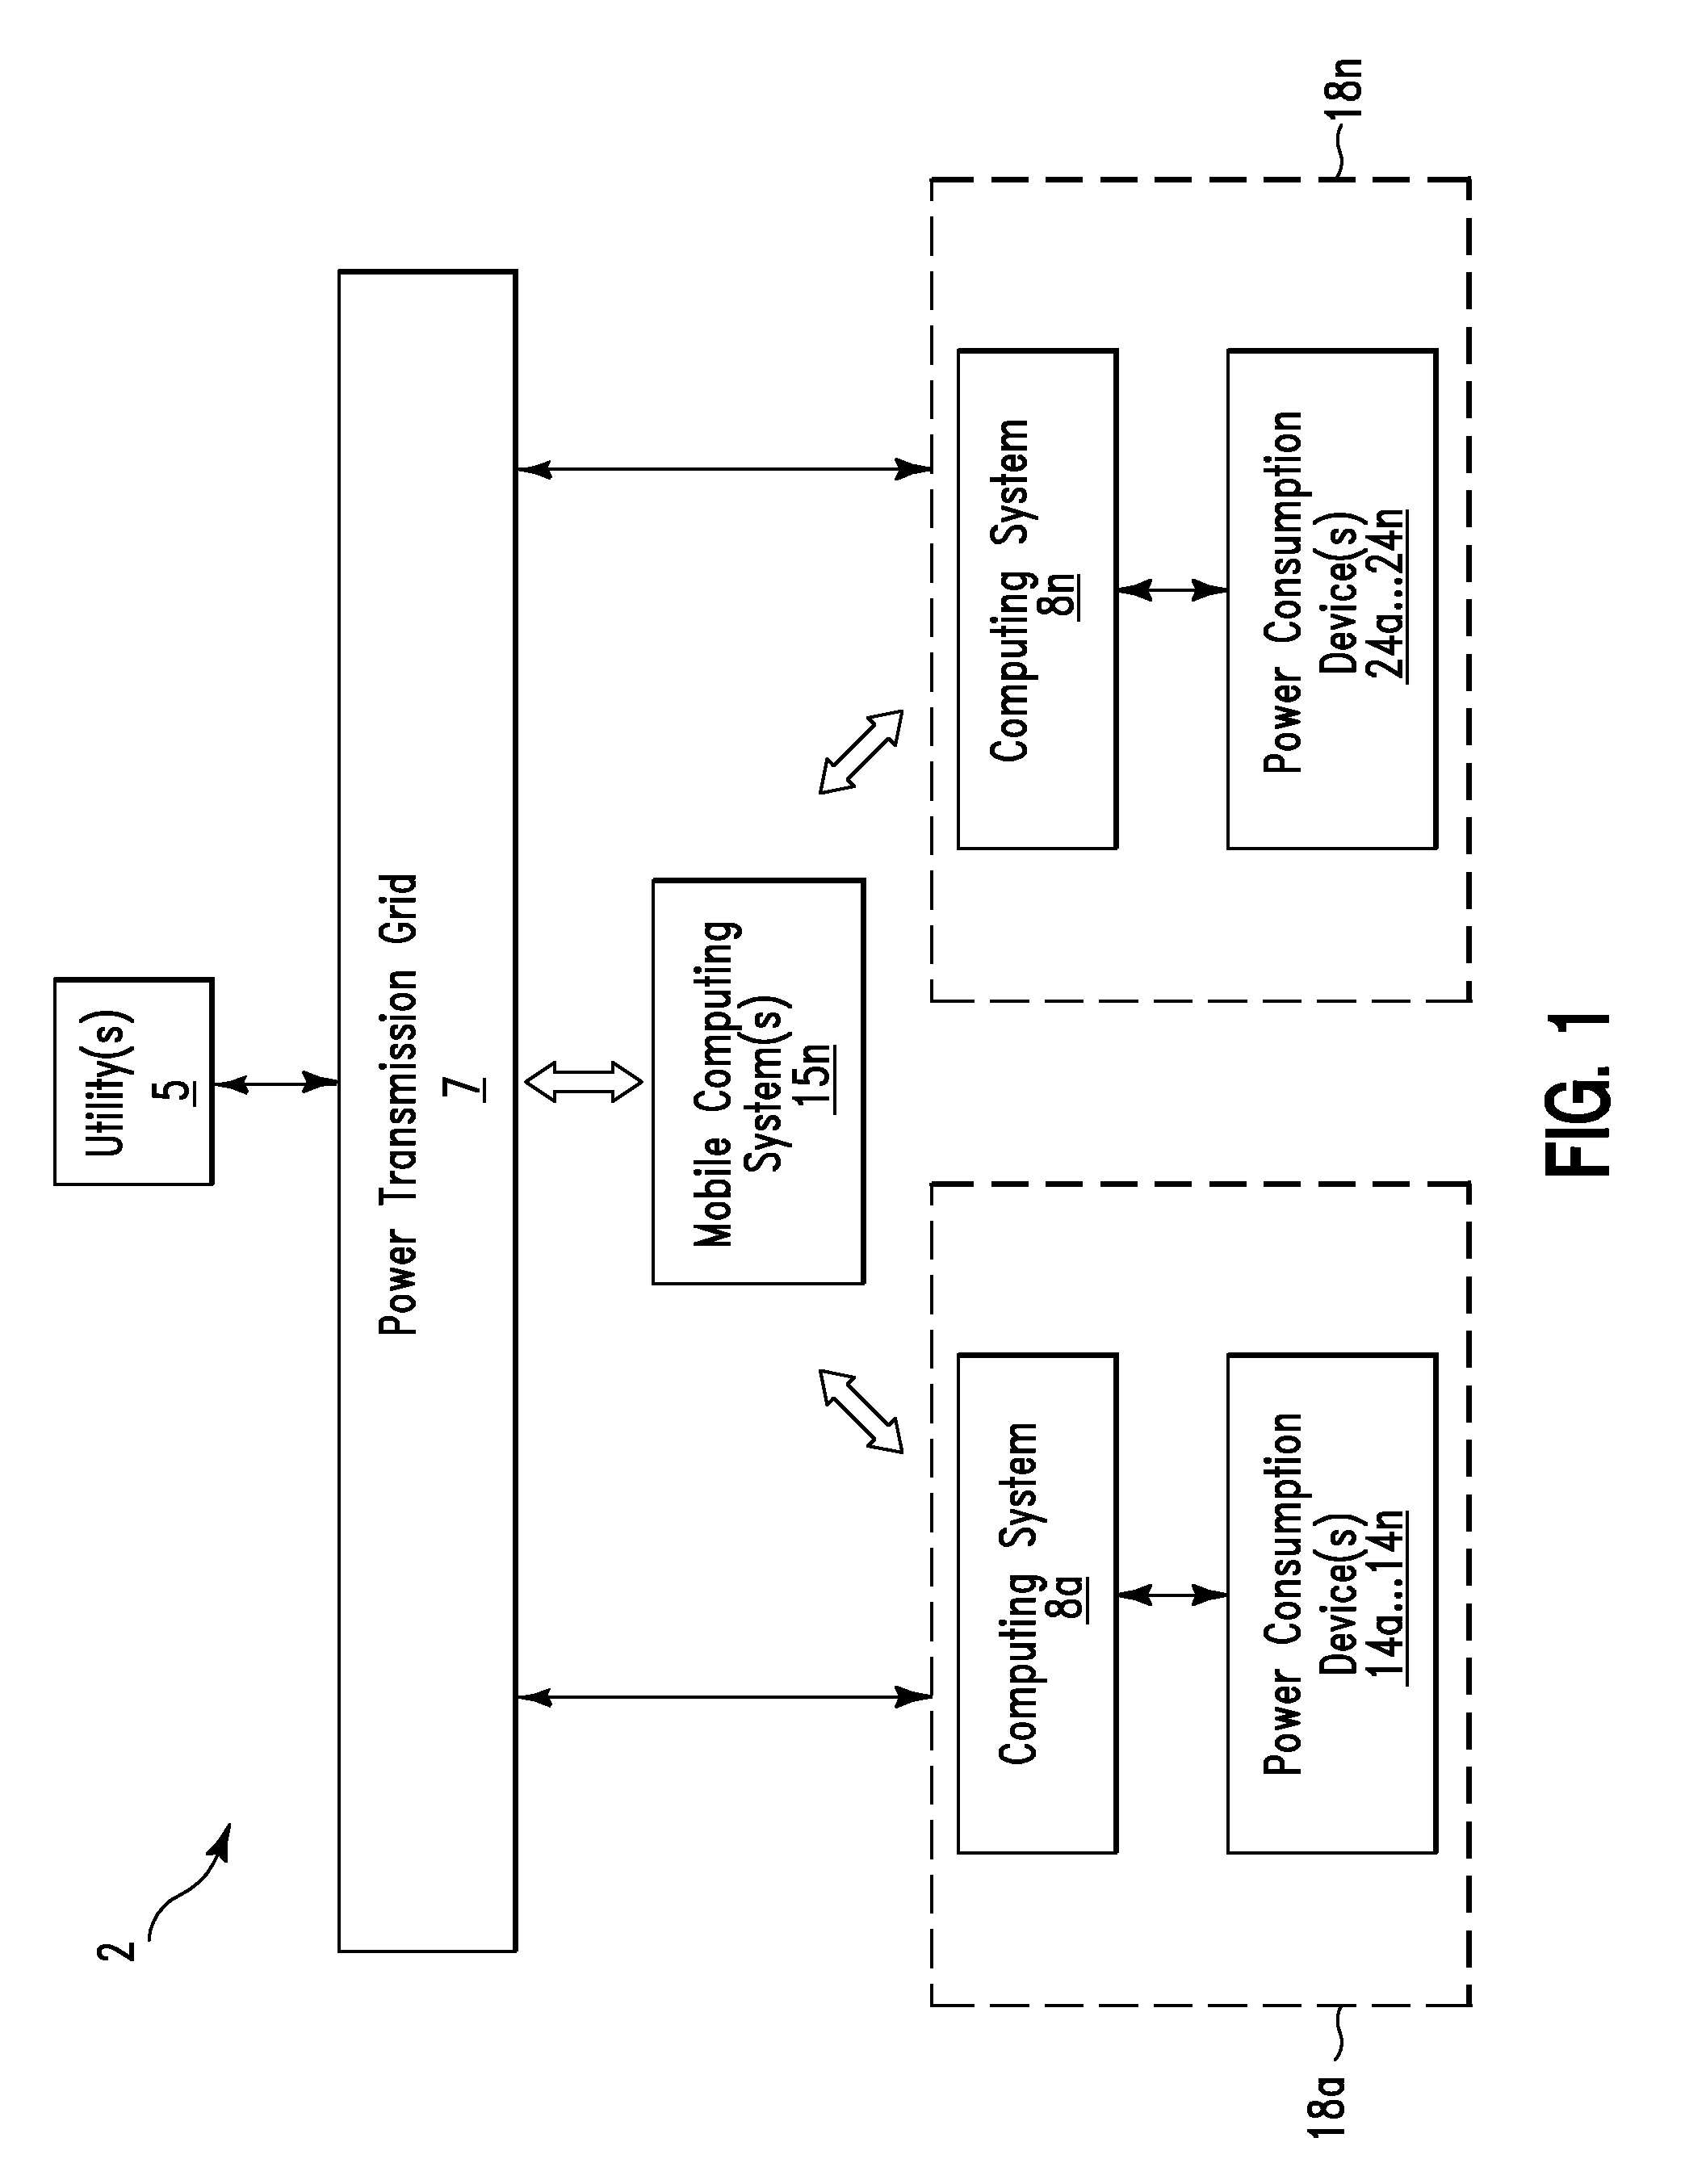 Power profile management method and system